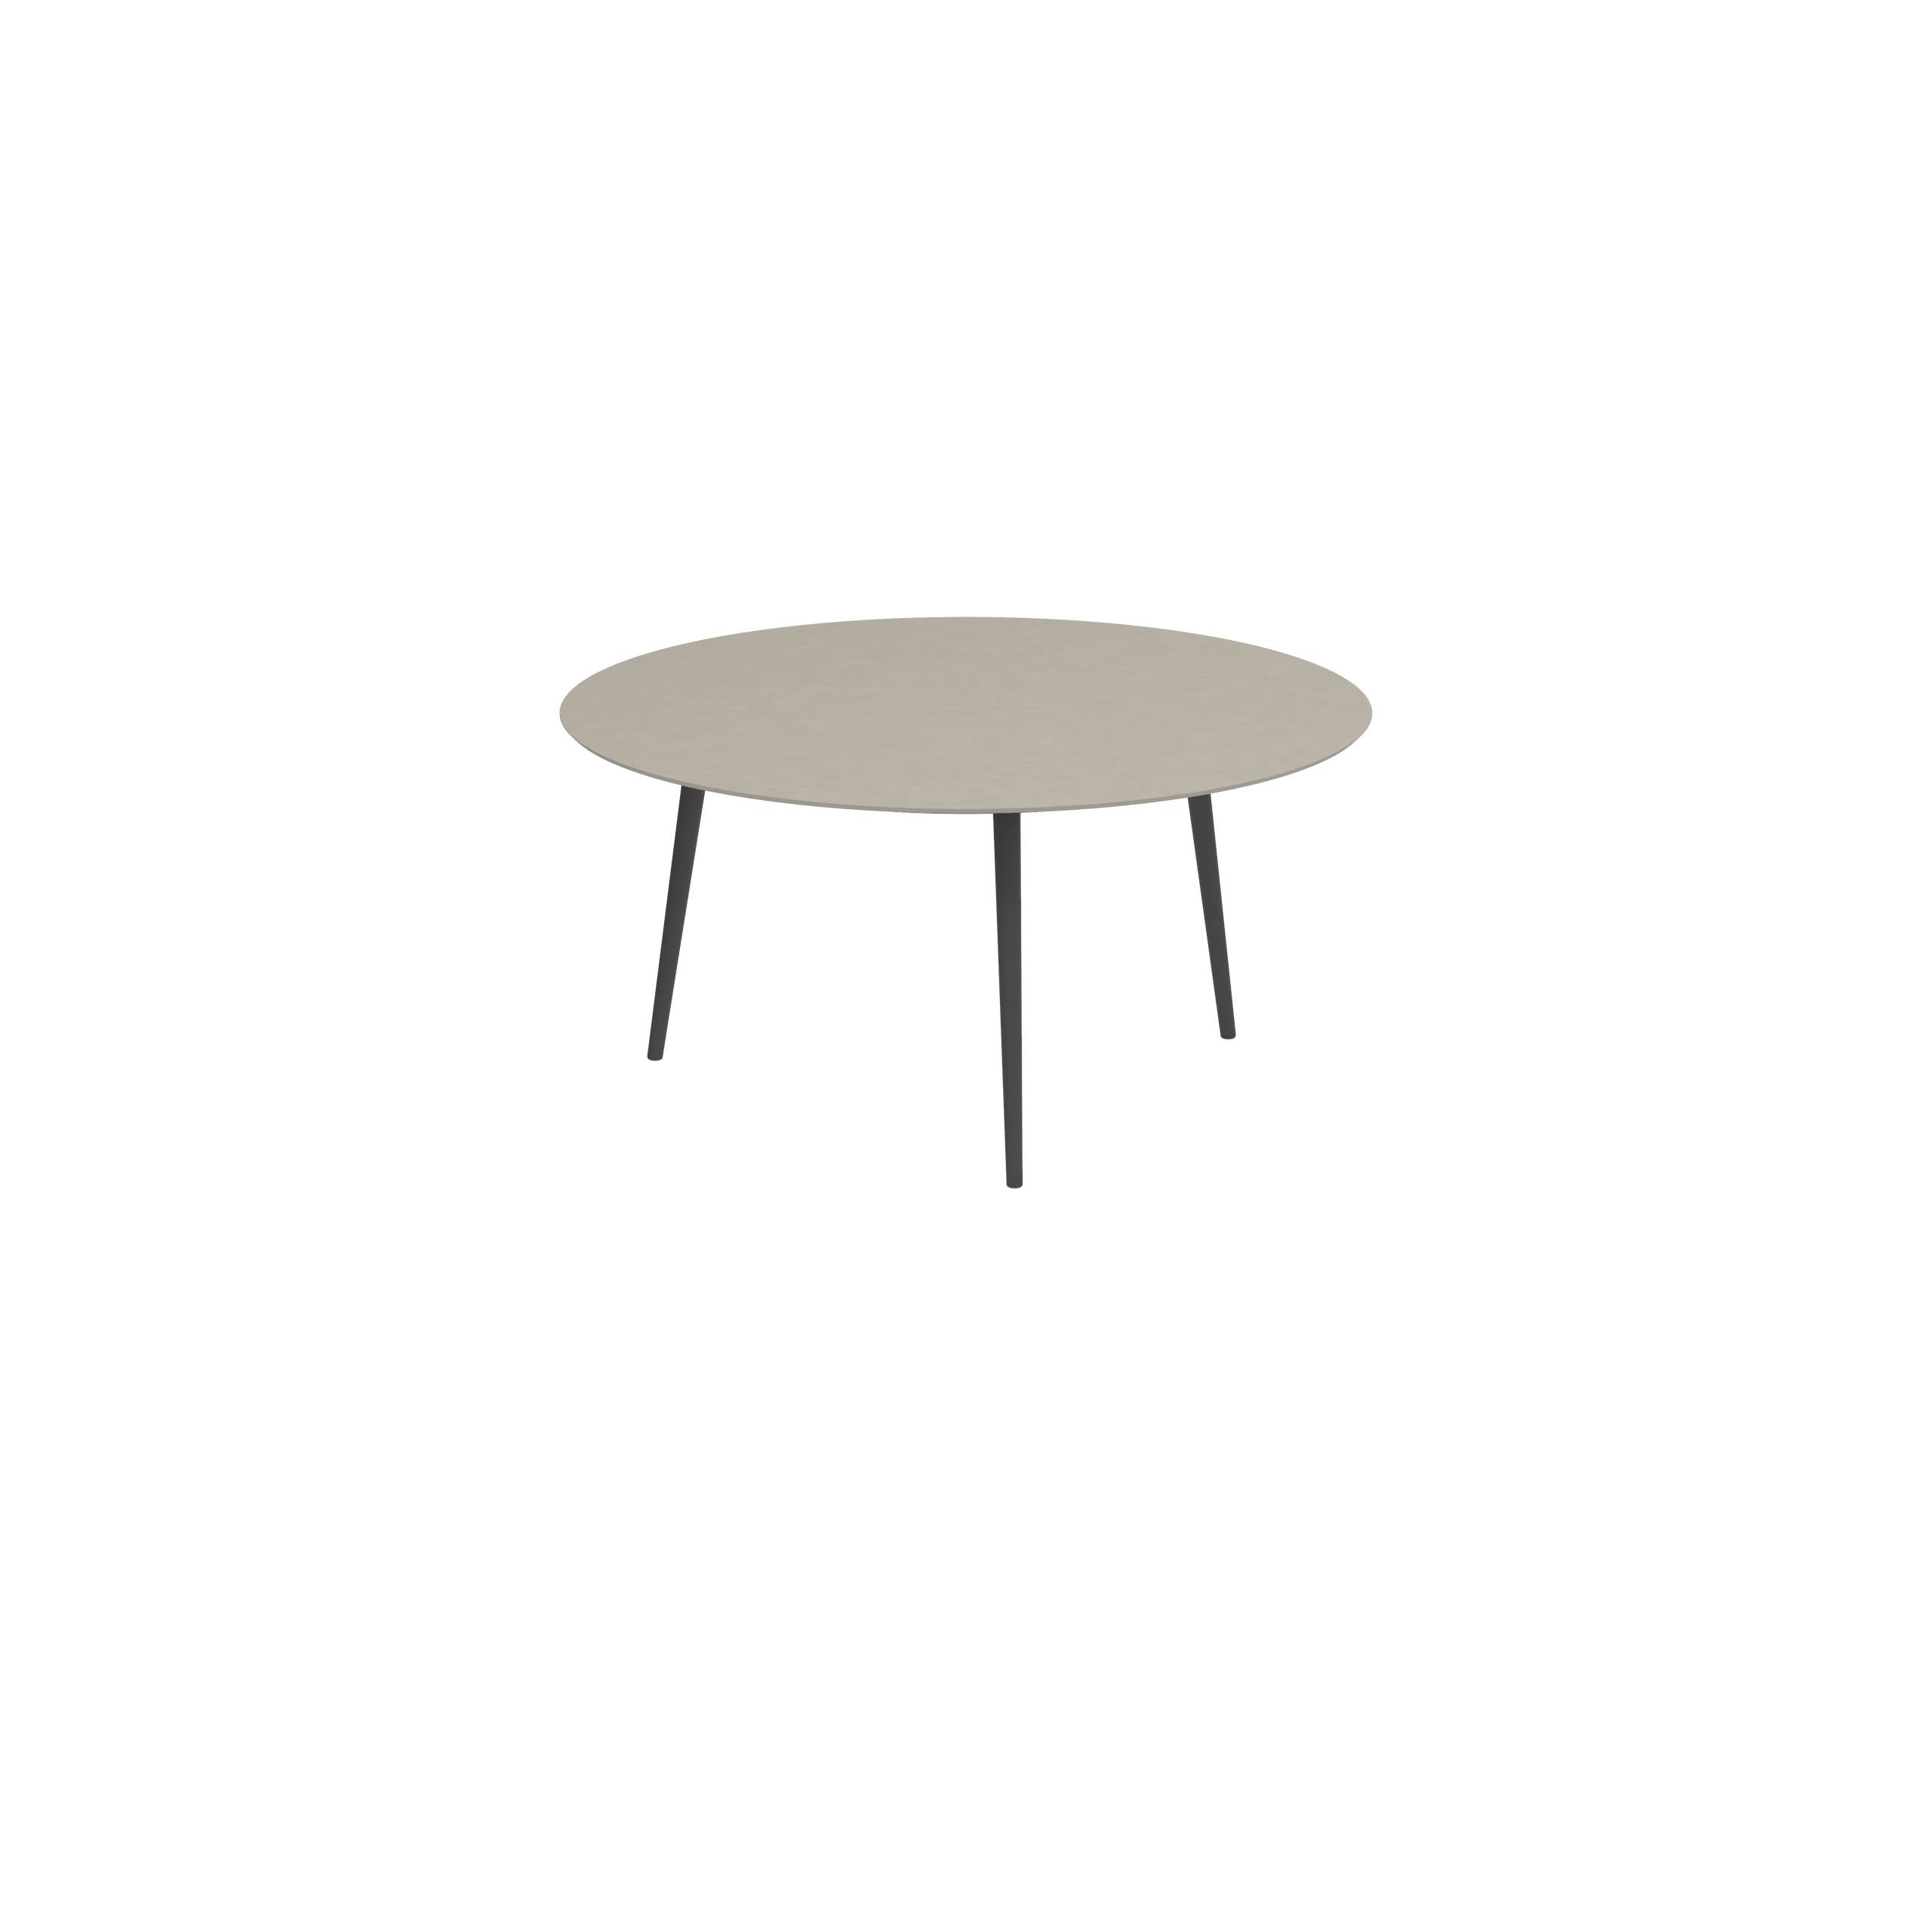 Styletto Standard Dining Table Ø 160cm Alu Legs Anthracite Ceramic Top Pearl Grey